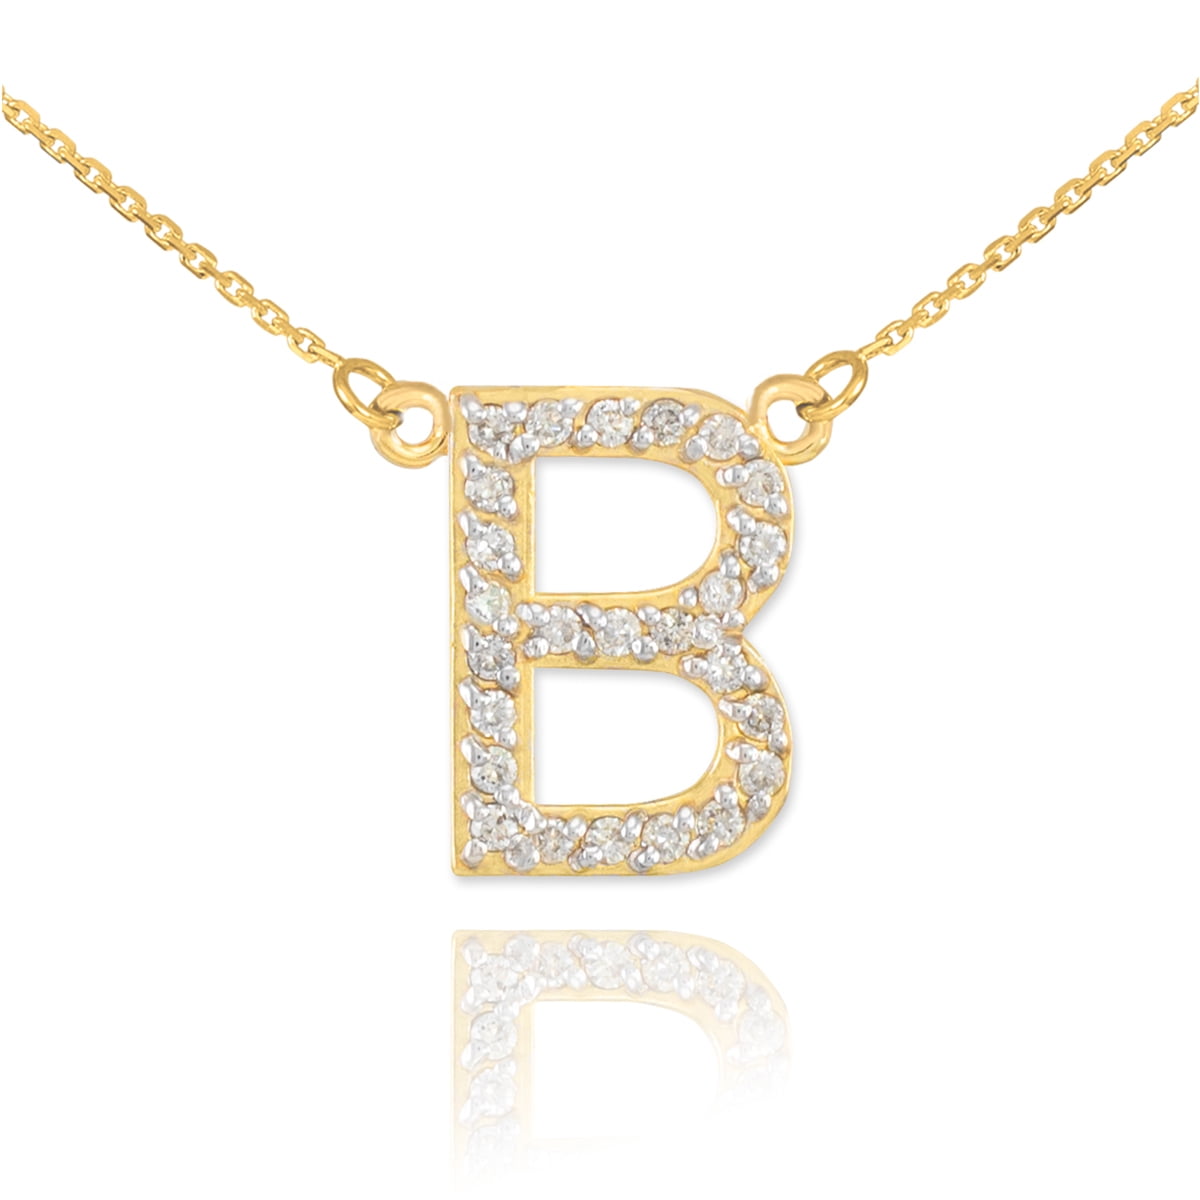 Initial "B" Pendant Necklace Natural Diamond 14K White Gold Over Sterling 18"